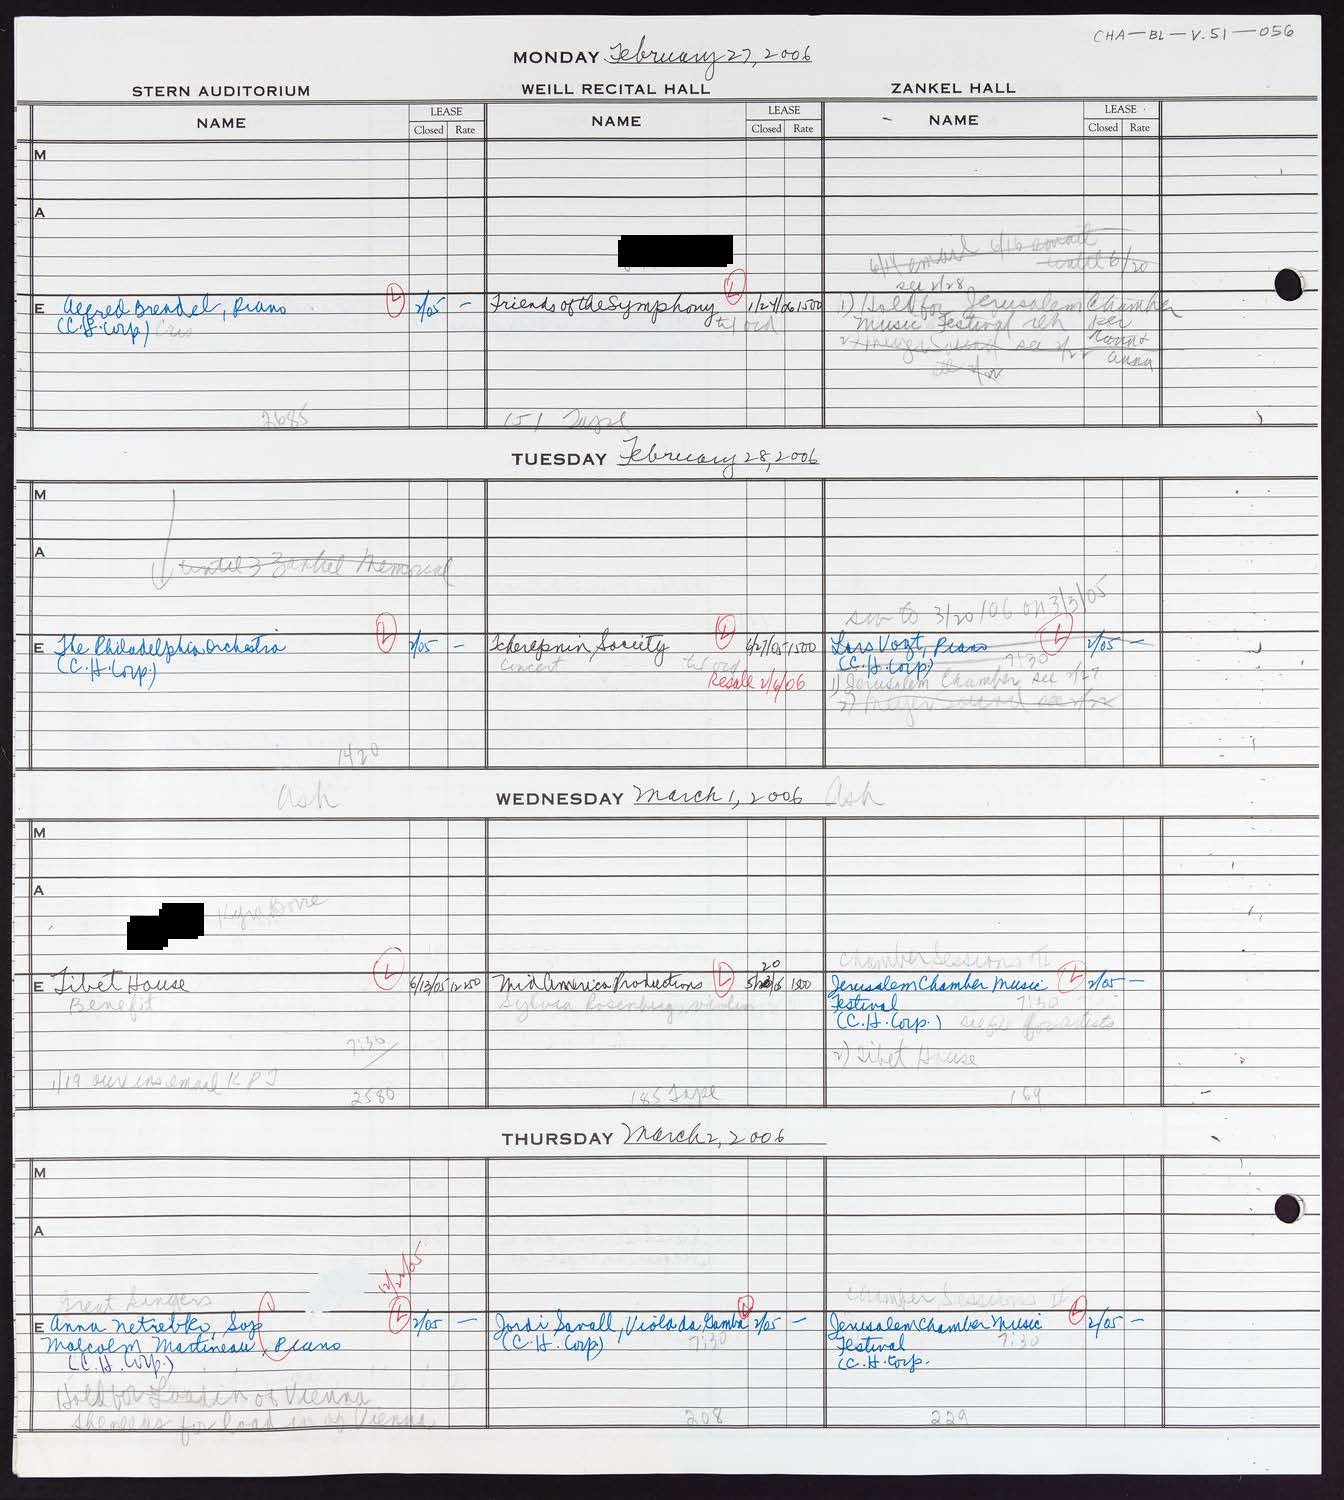 Carnegie Hall Booking Ledger, volume 51, page 56